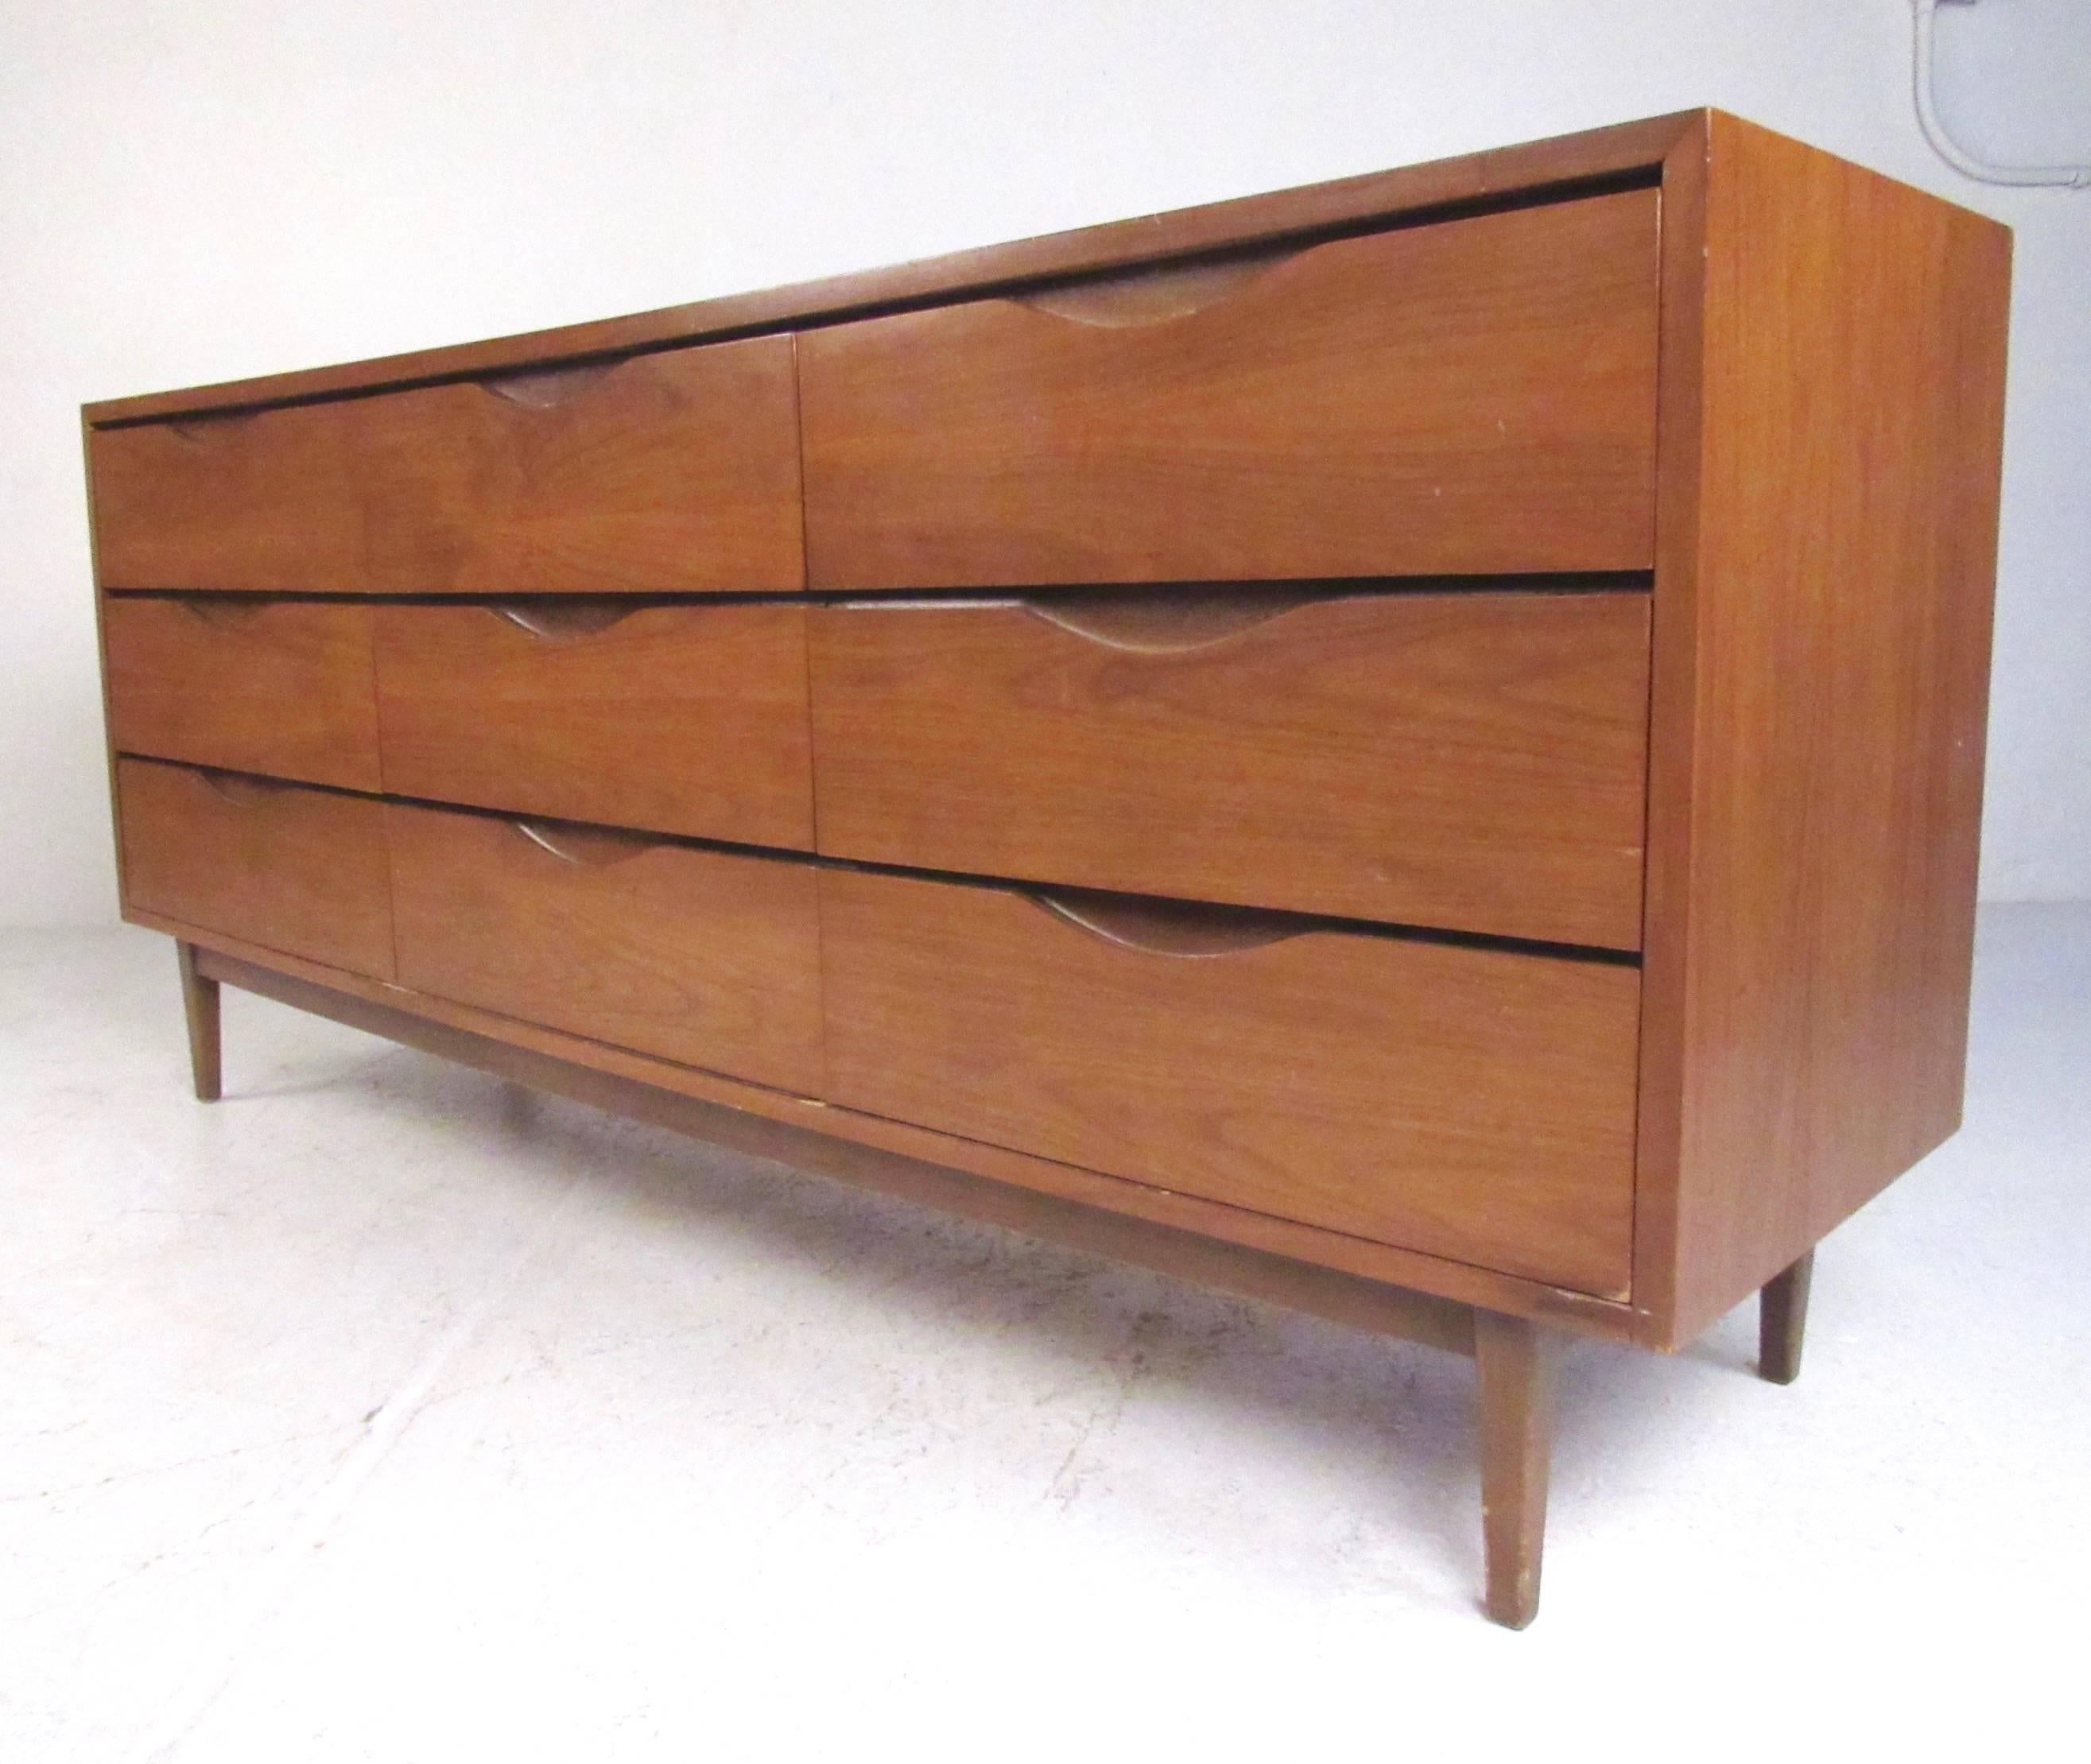 This stylish vintage walnut dresser features cut-away drawer pulls, tapered legs, and a rich natural wood finish. Plenty of storage for any setting, additional highboy dresser and matching nightstands available. Please confirm item location (NY or